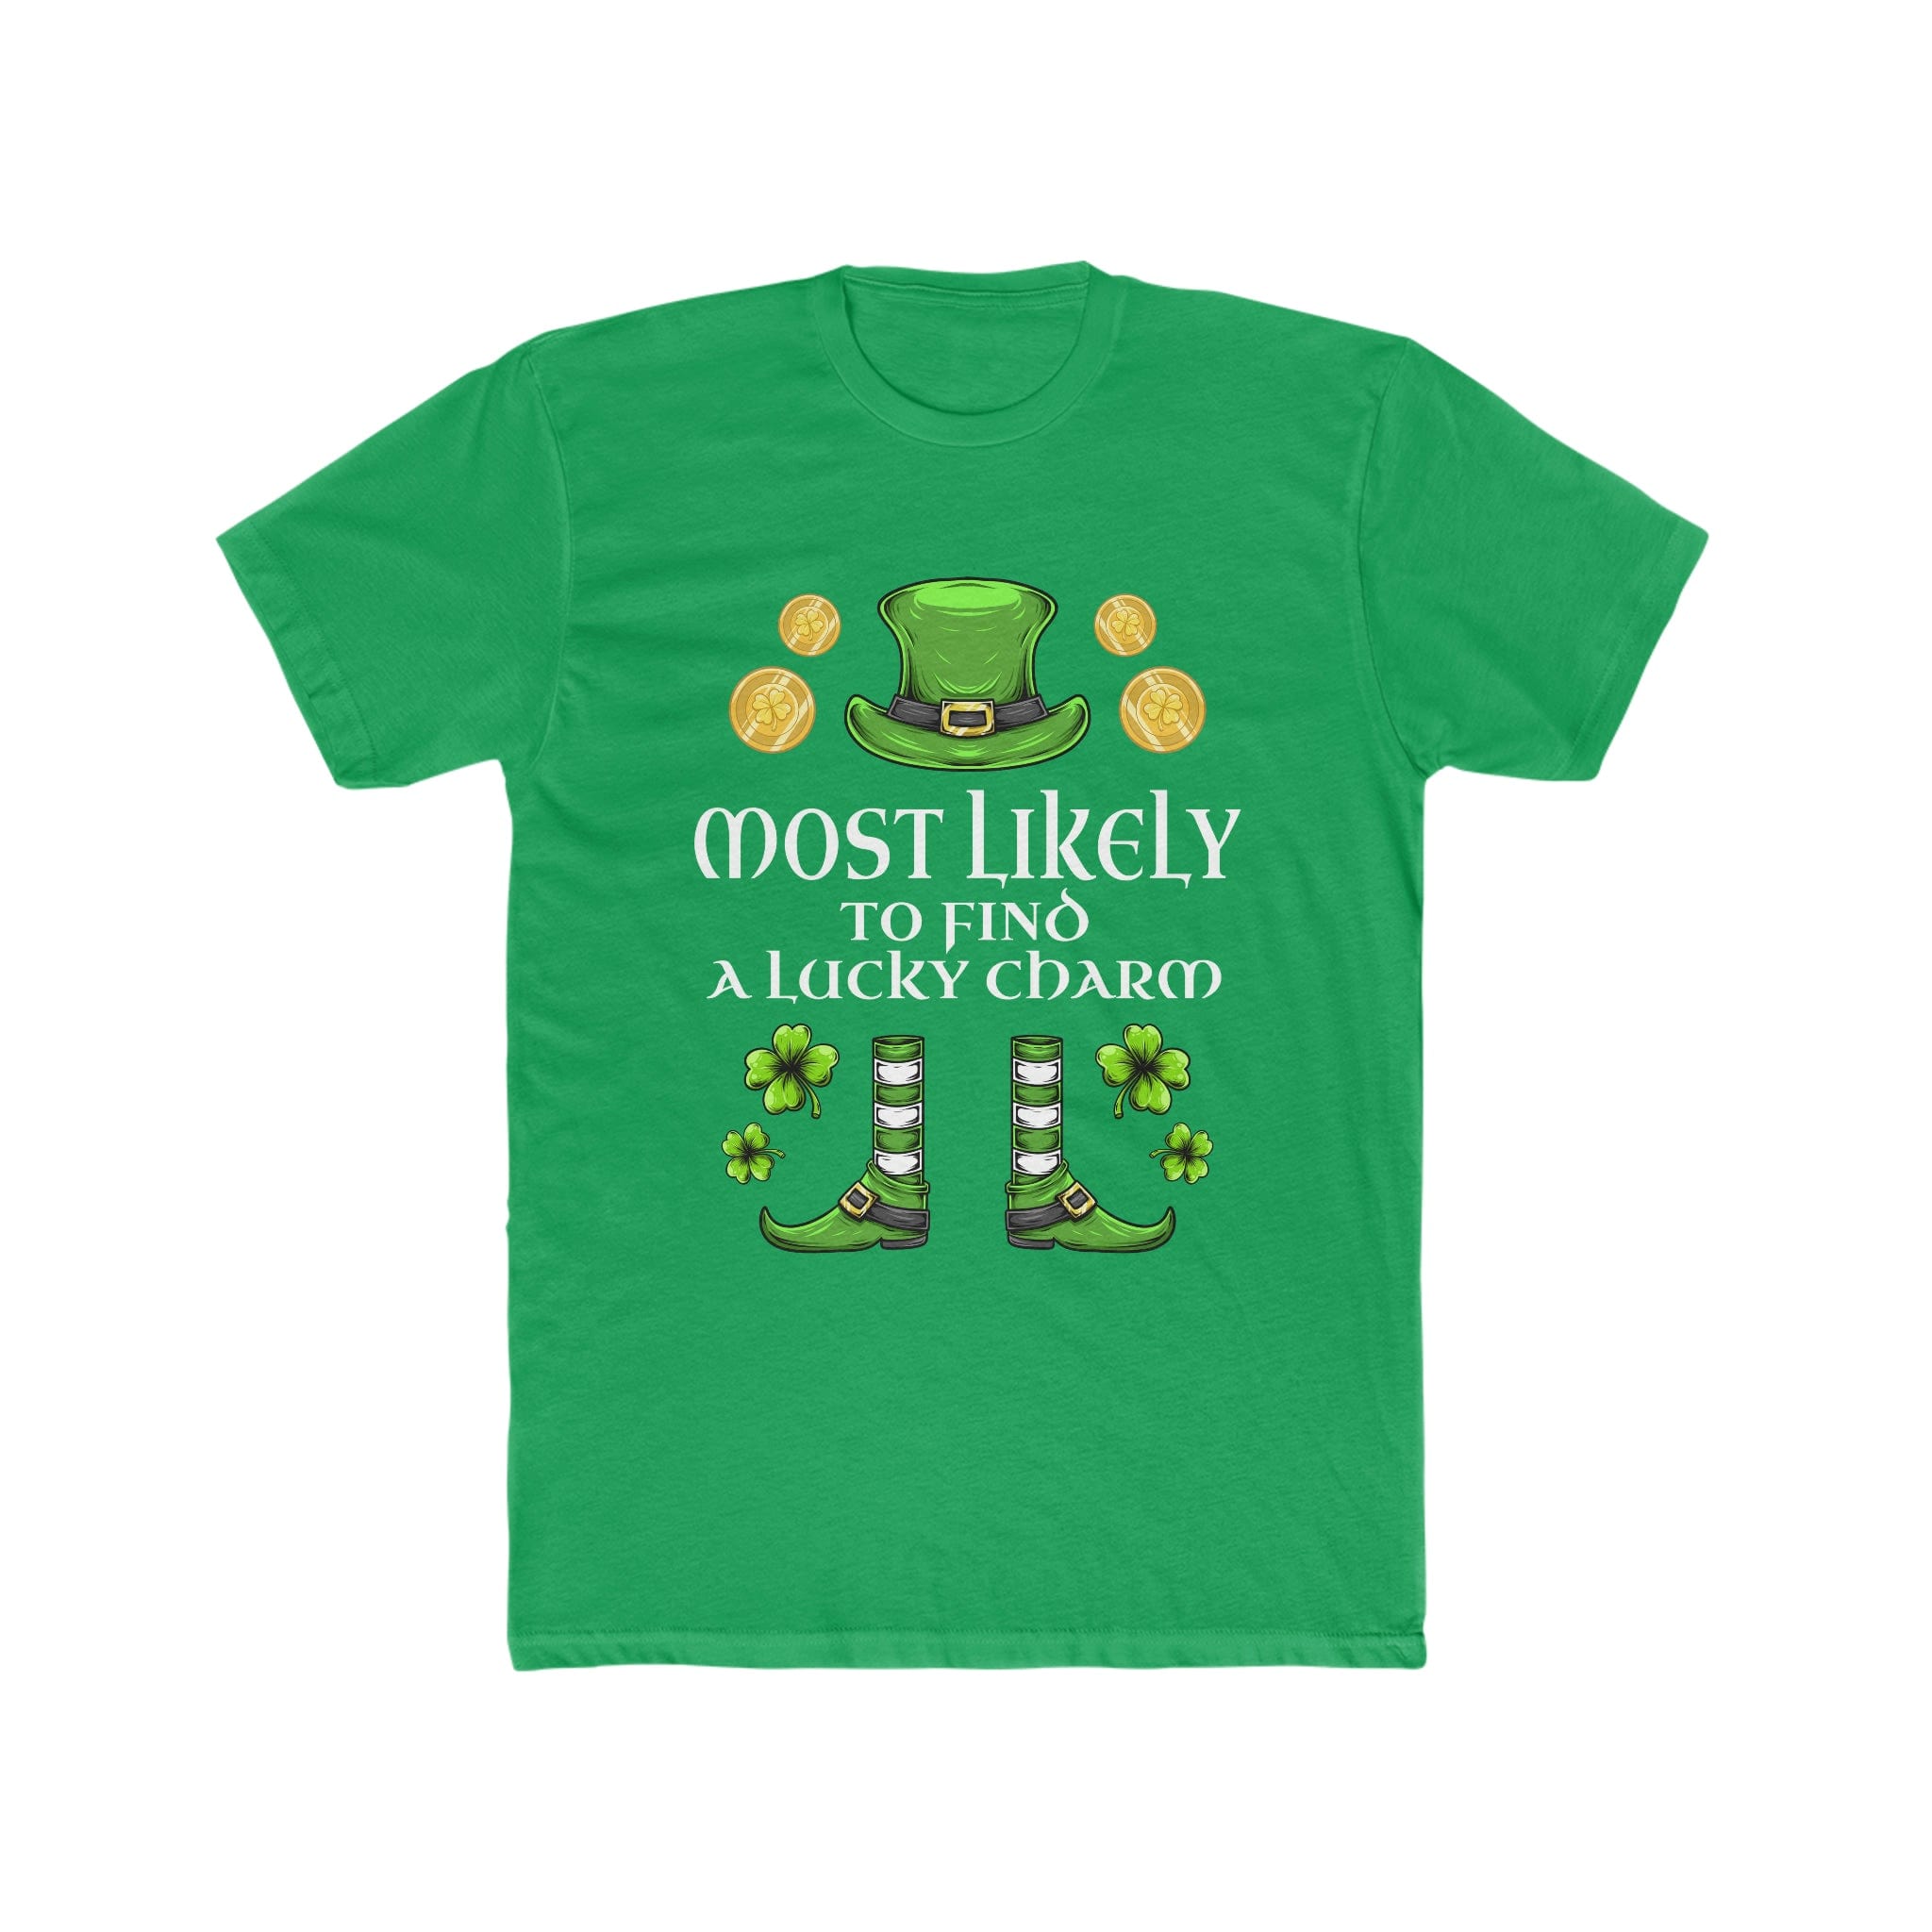 Most likely TO FIND A LUCKY CHARM Premium Unisex Shirt